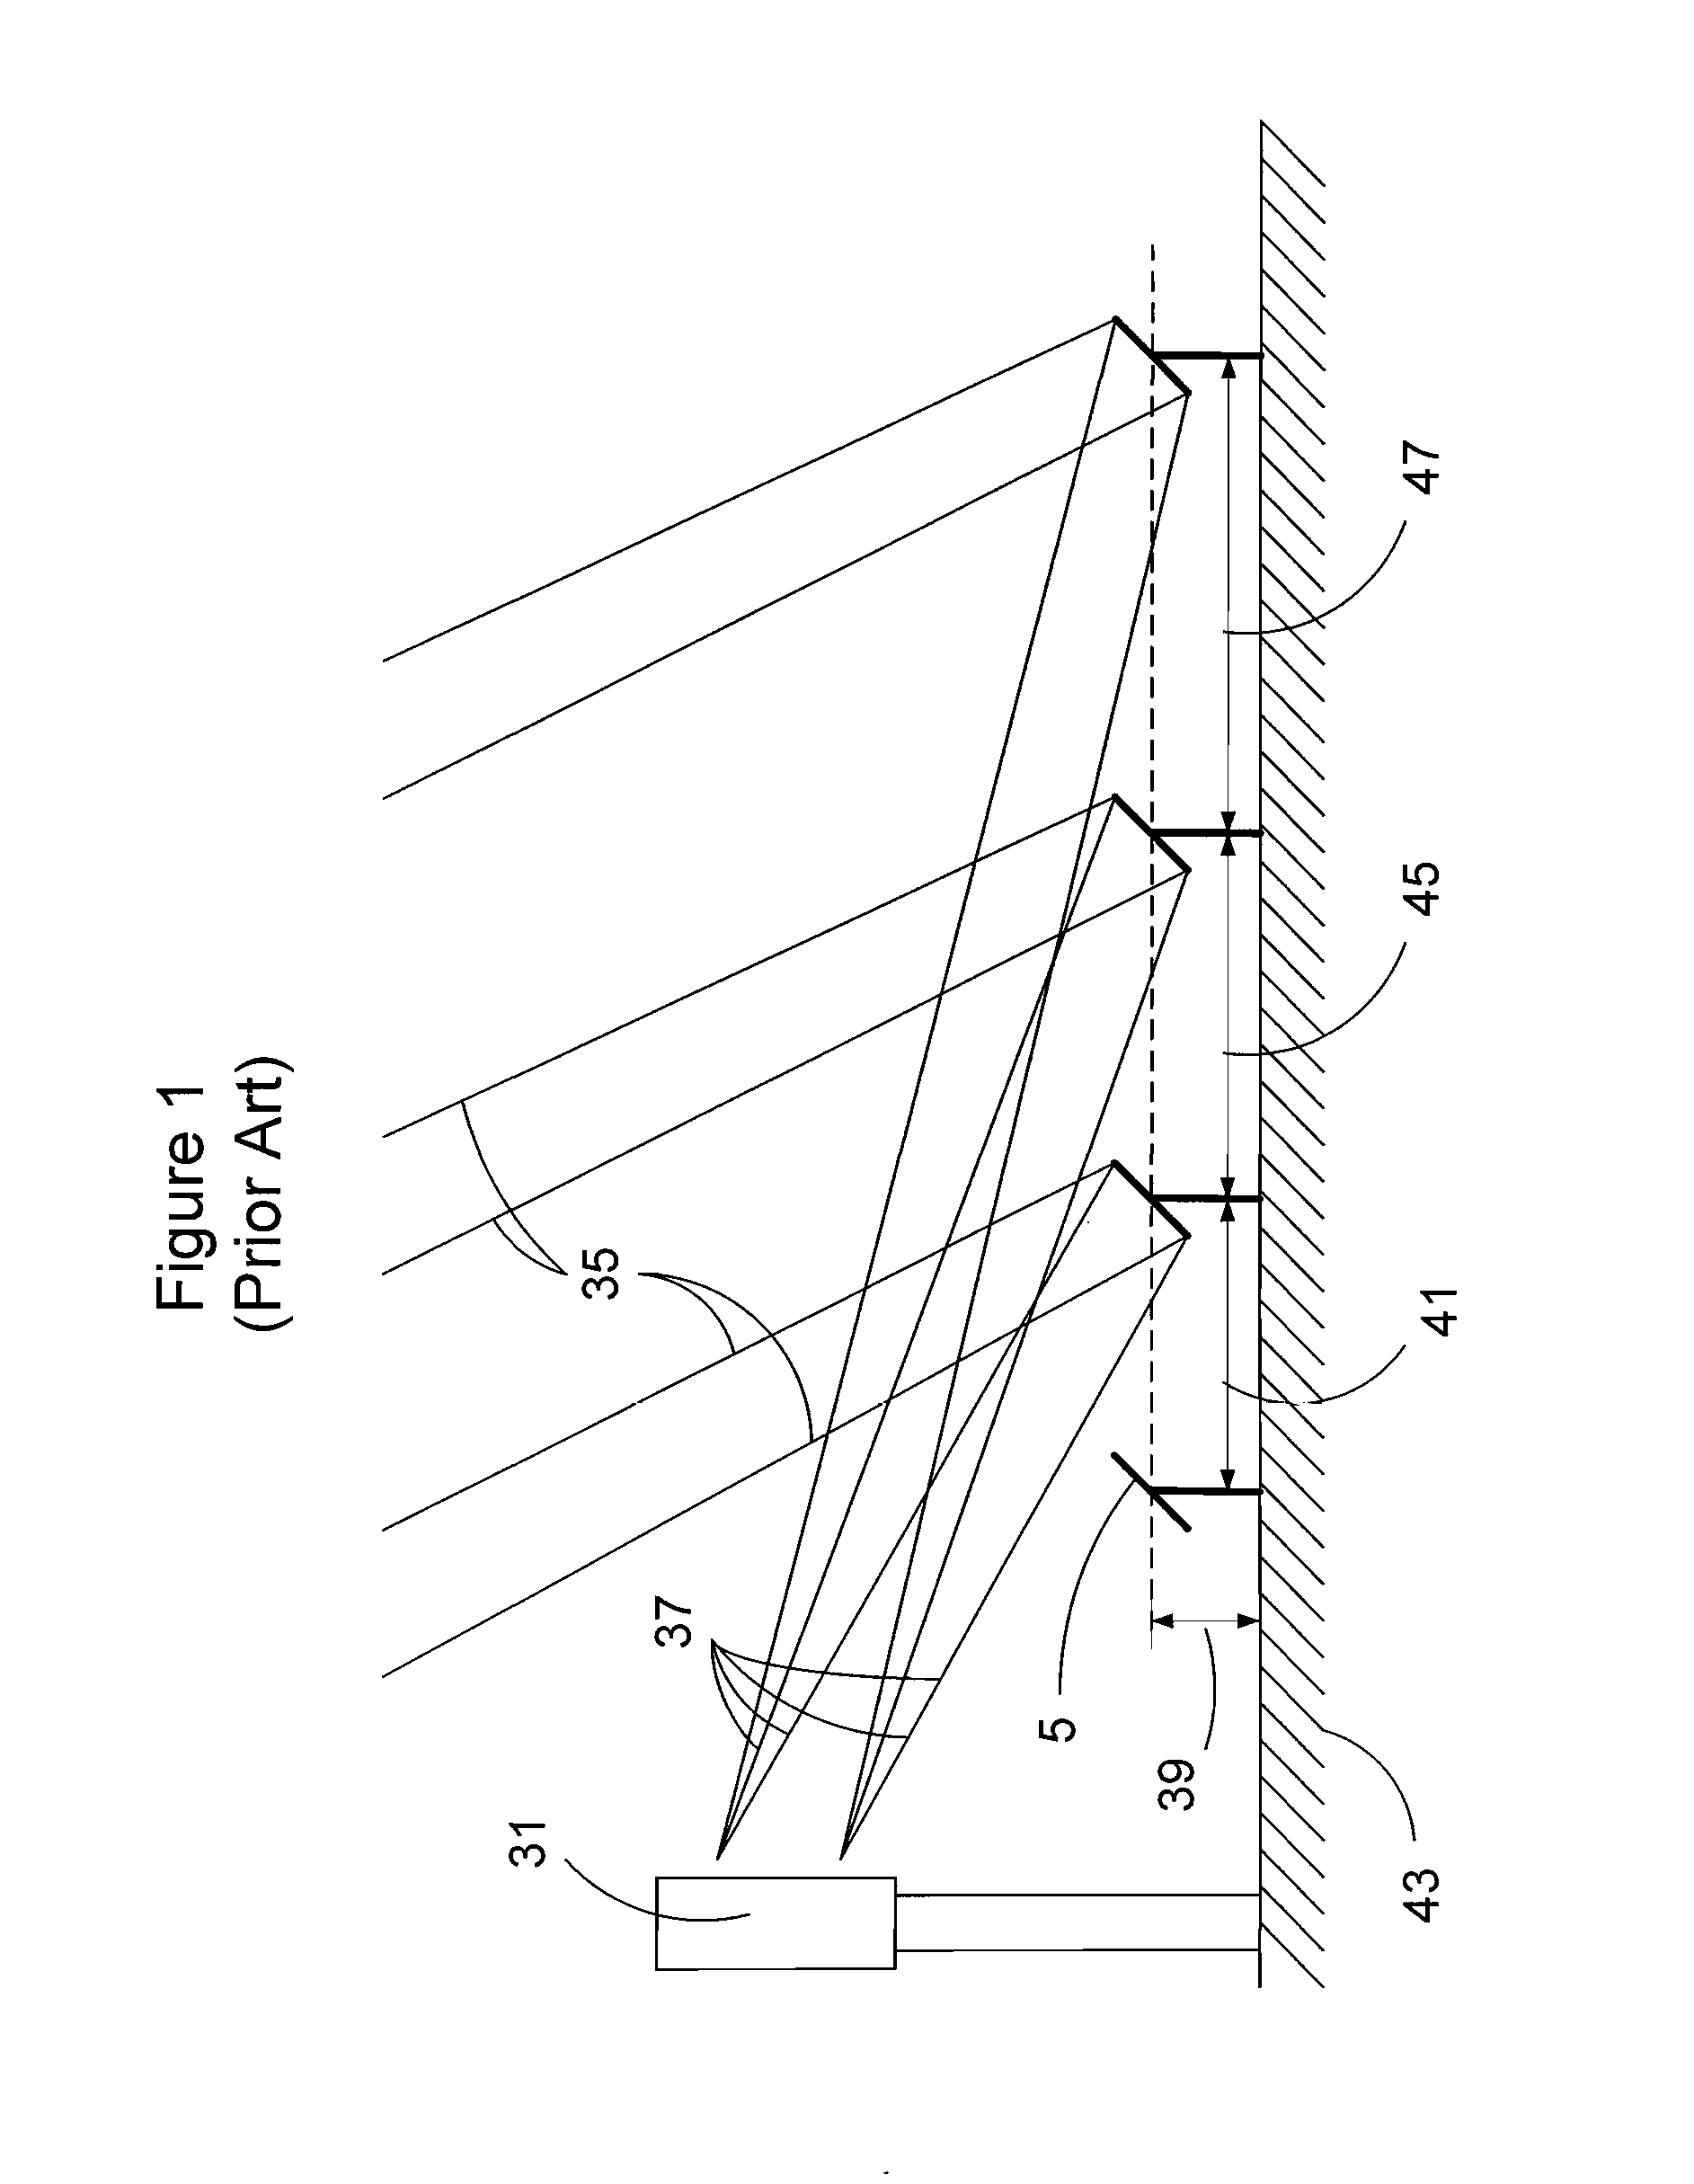 Apparatus and method for configuring heliostat fields